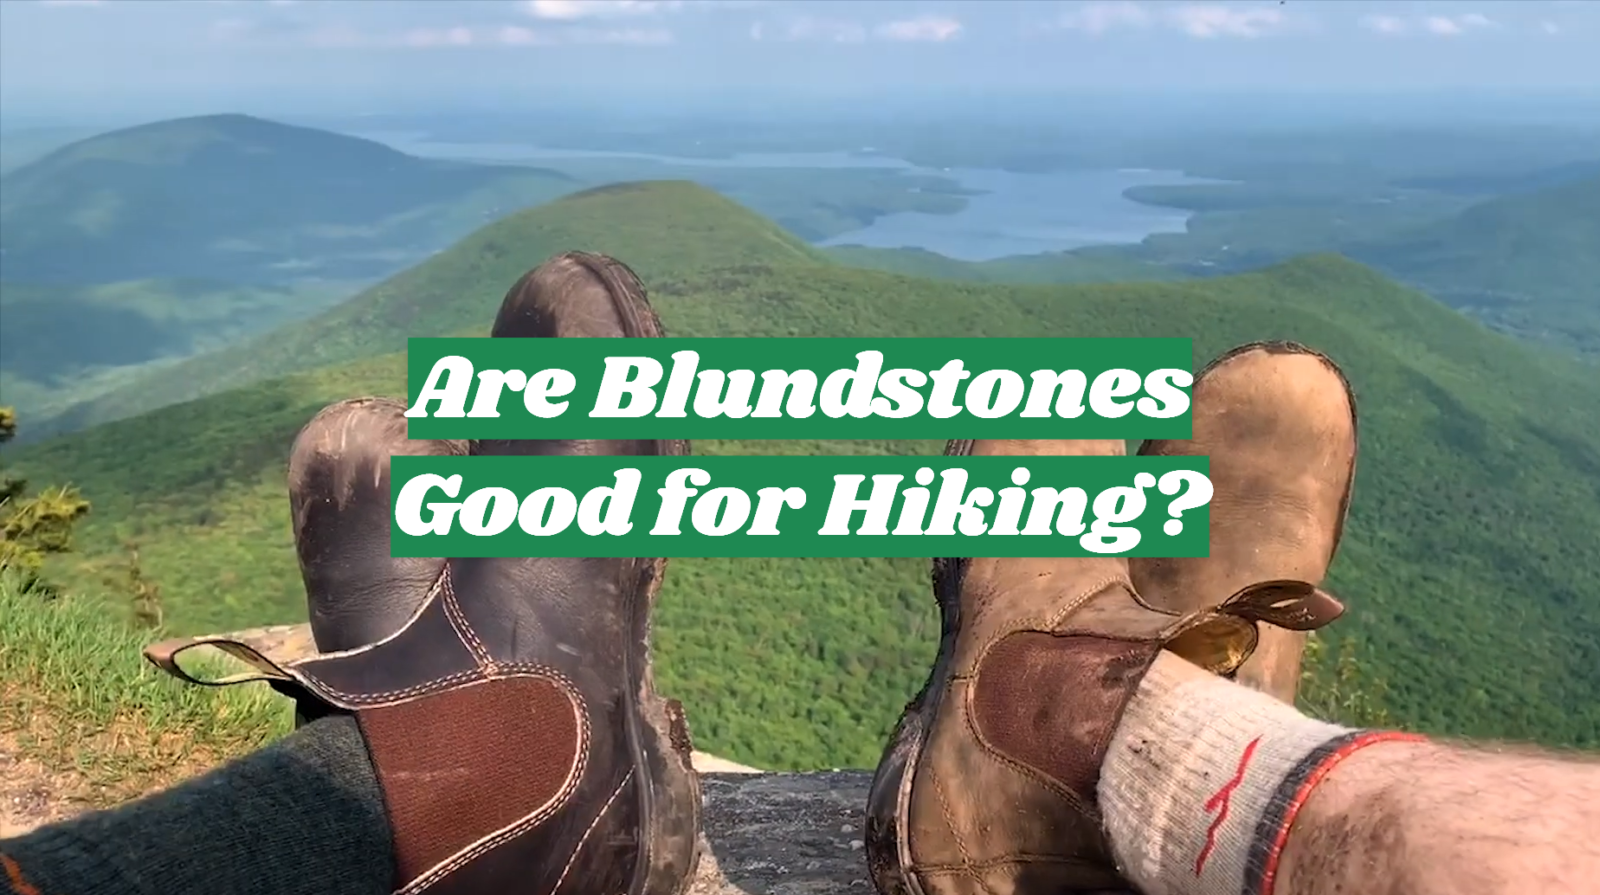 Are Blundstones Good for Hiking?